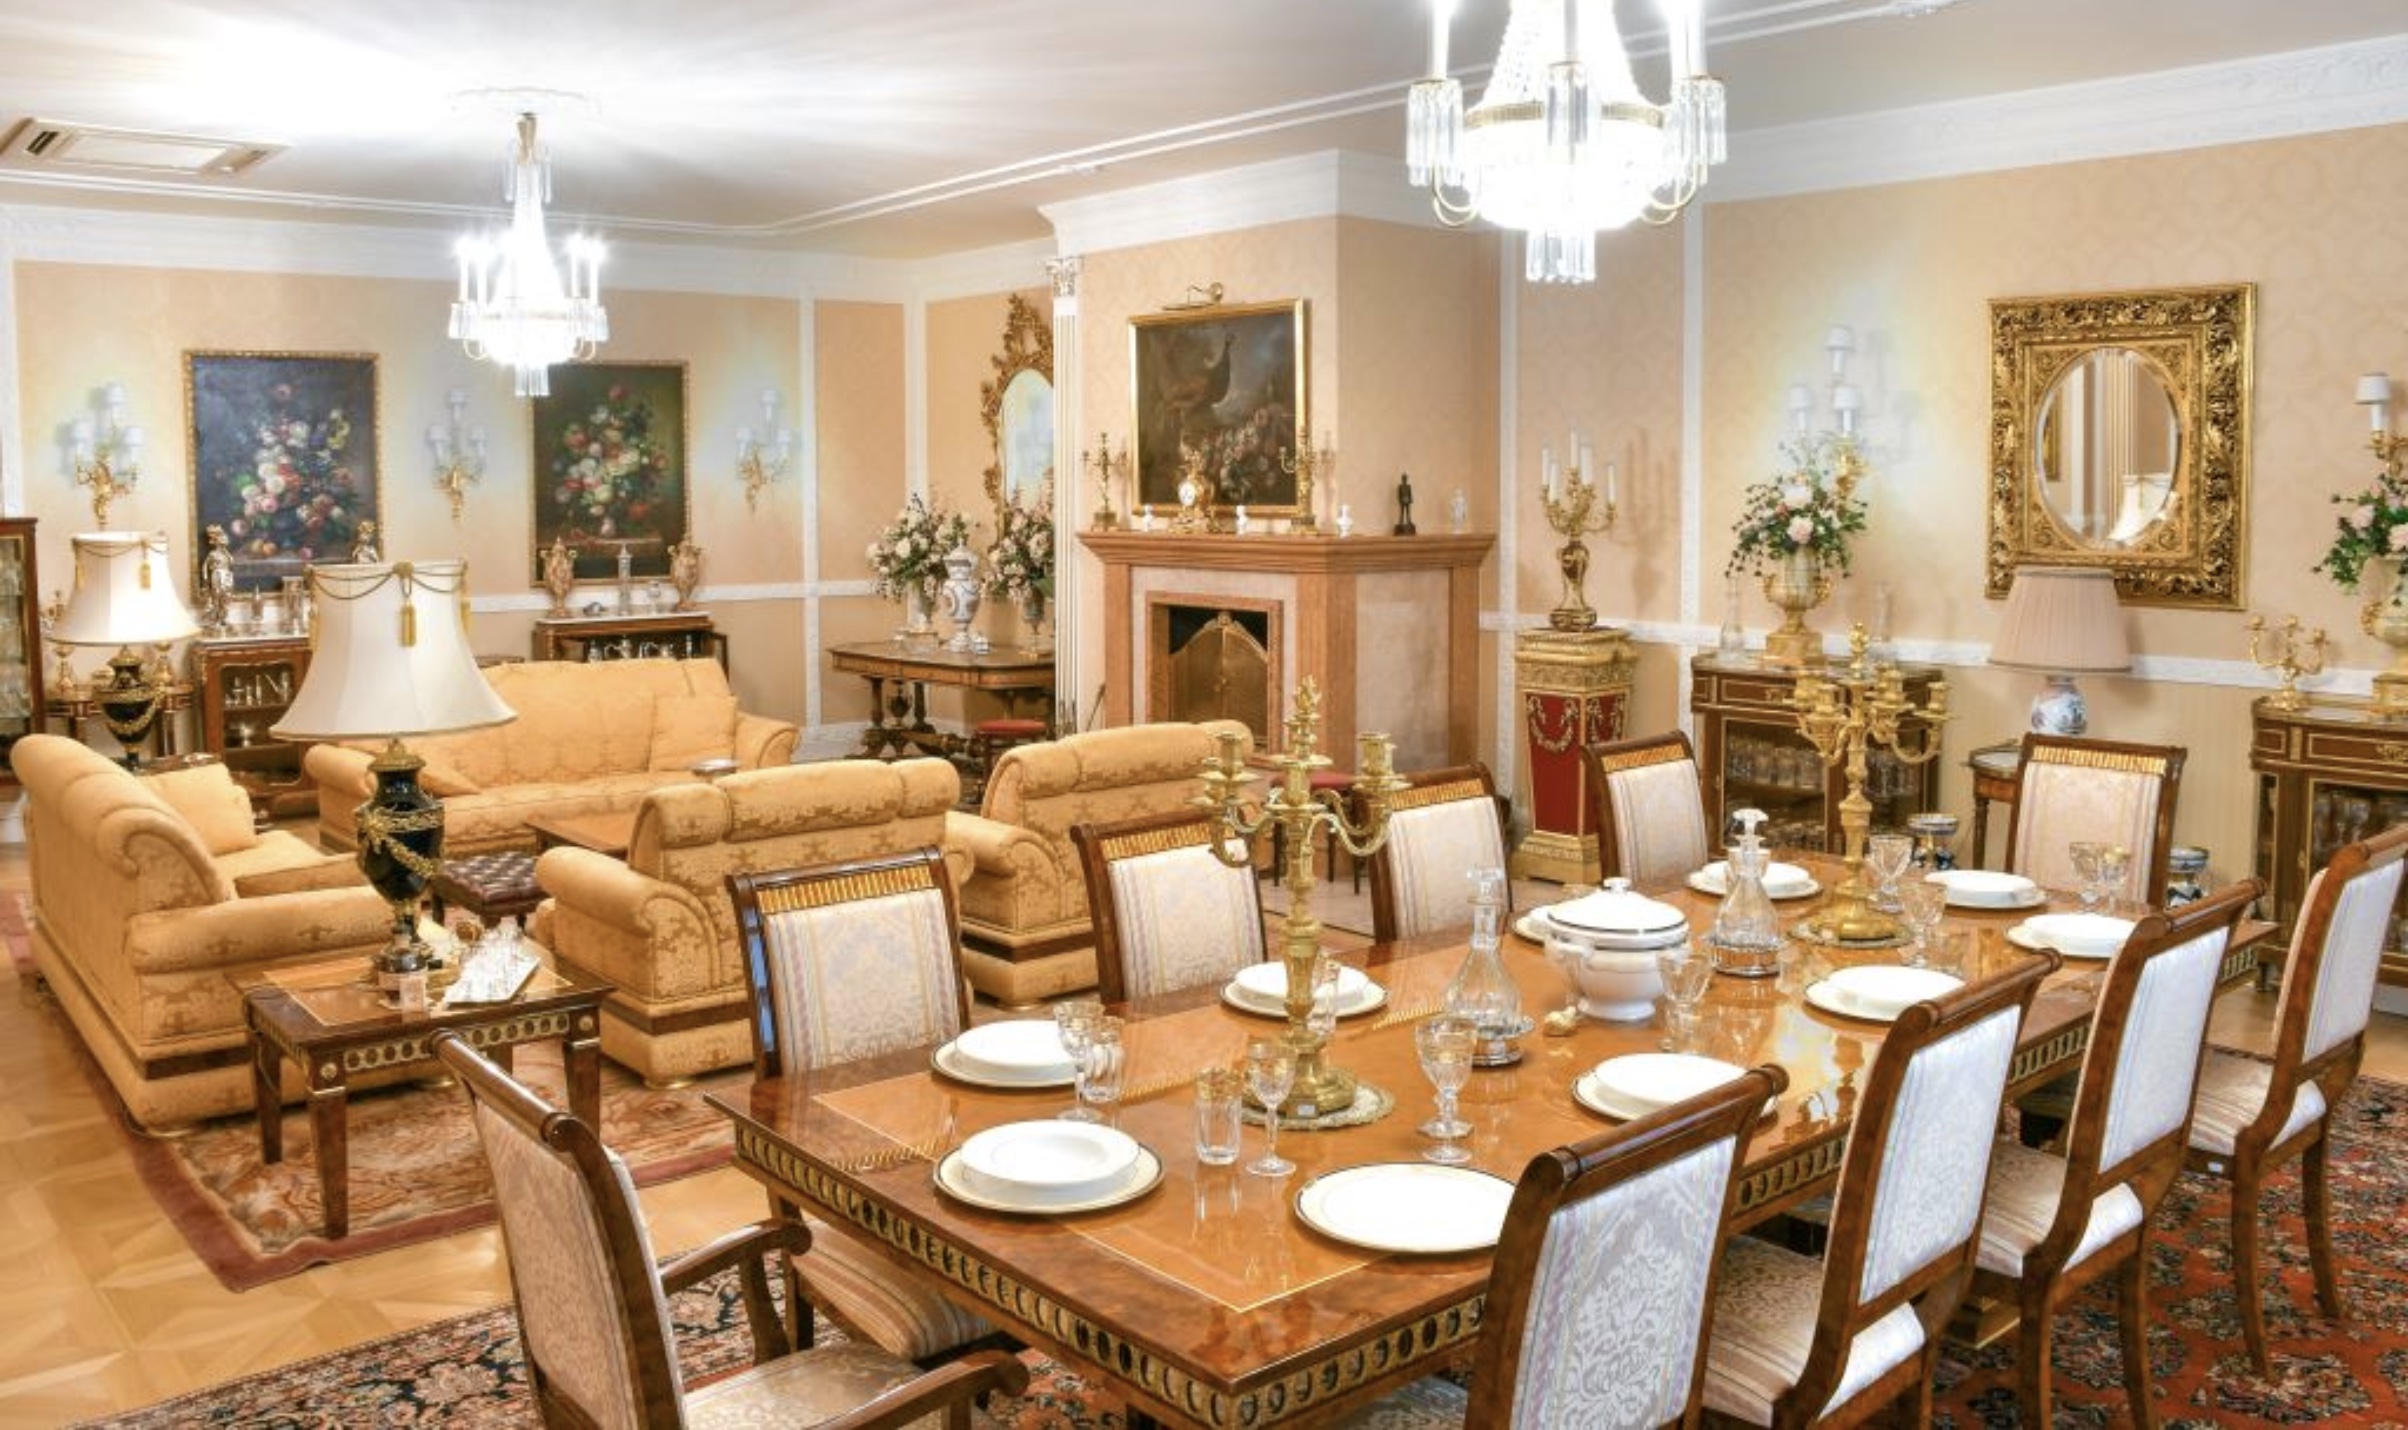 Contents from private Viennese estate to sell – Antique Collecting